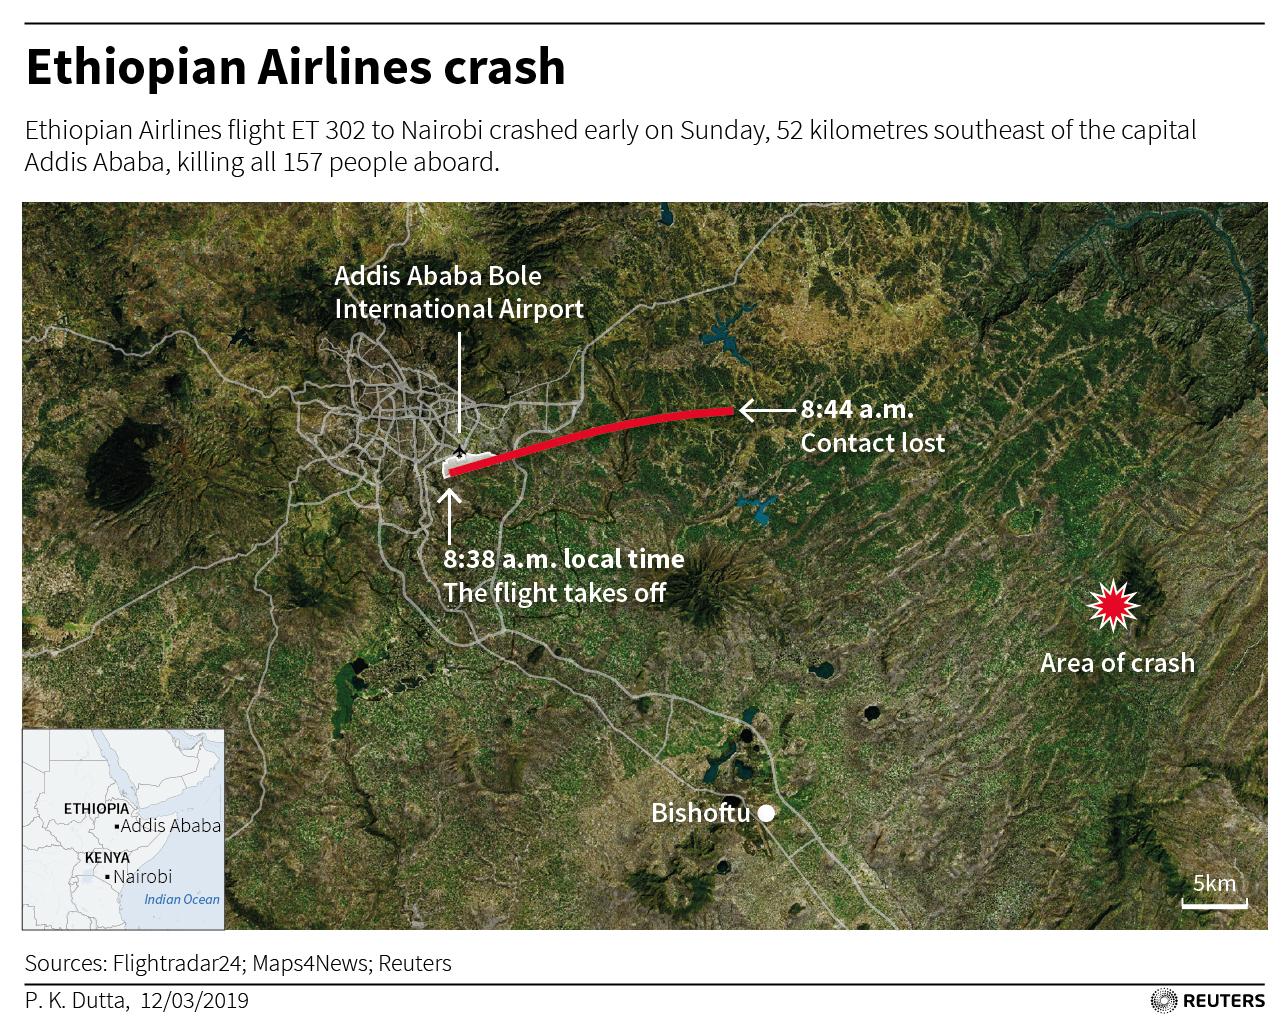 A map of the take-off and crash locations of the Ethiopia Airlines crash.